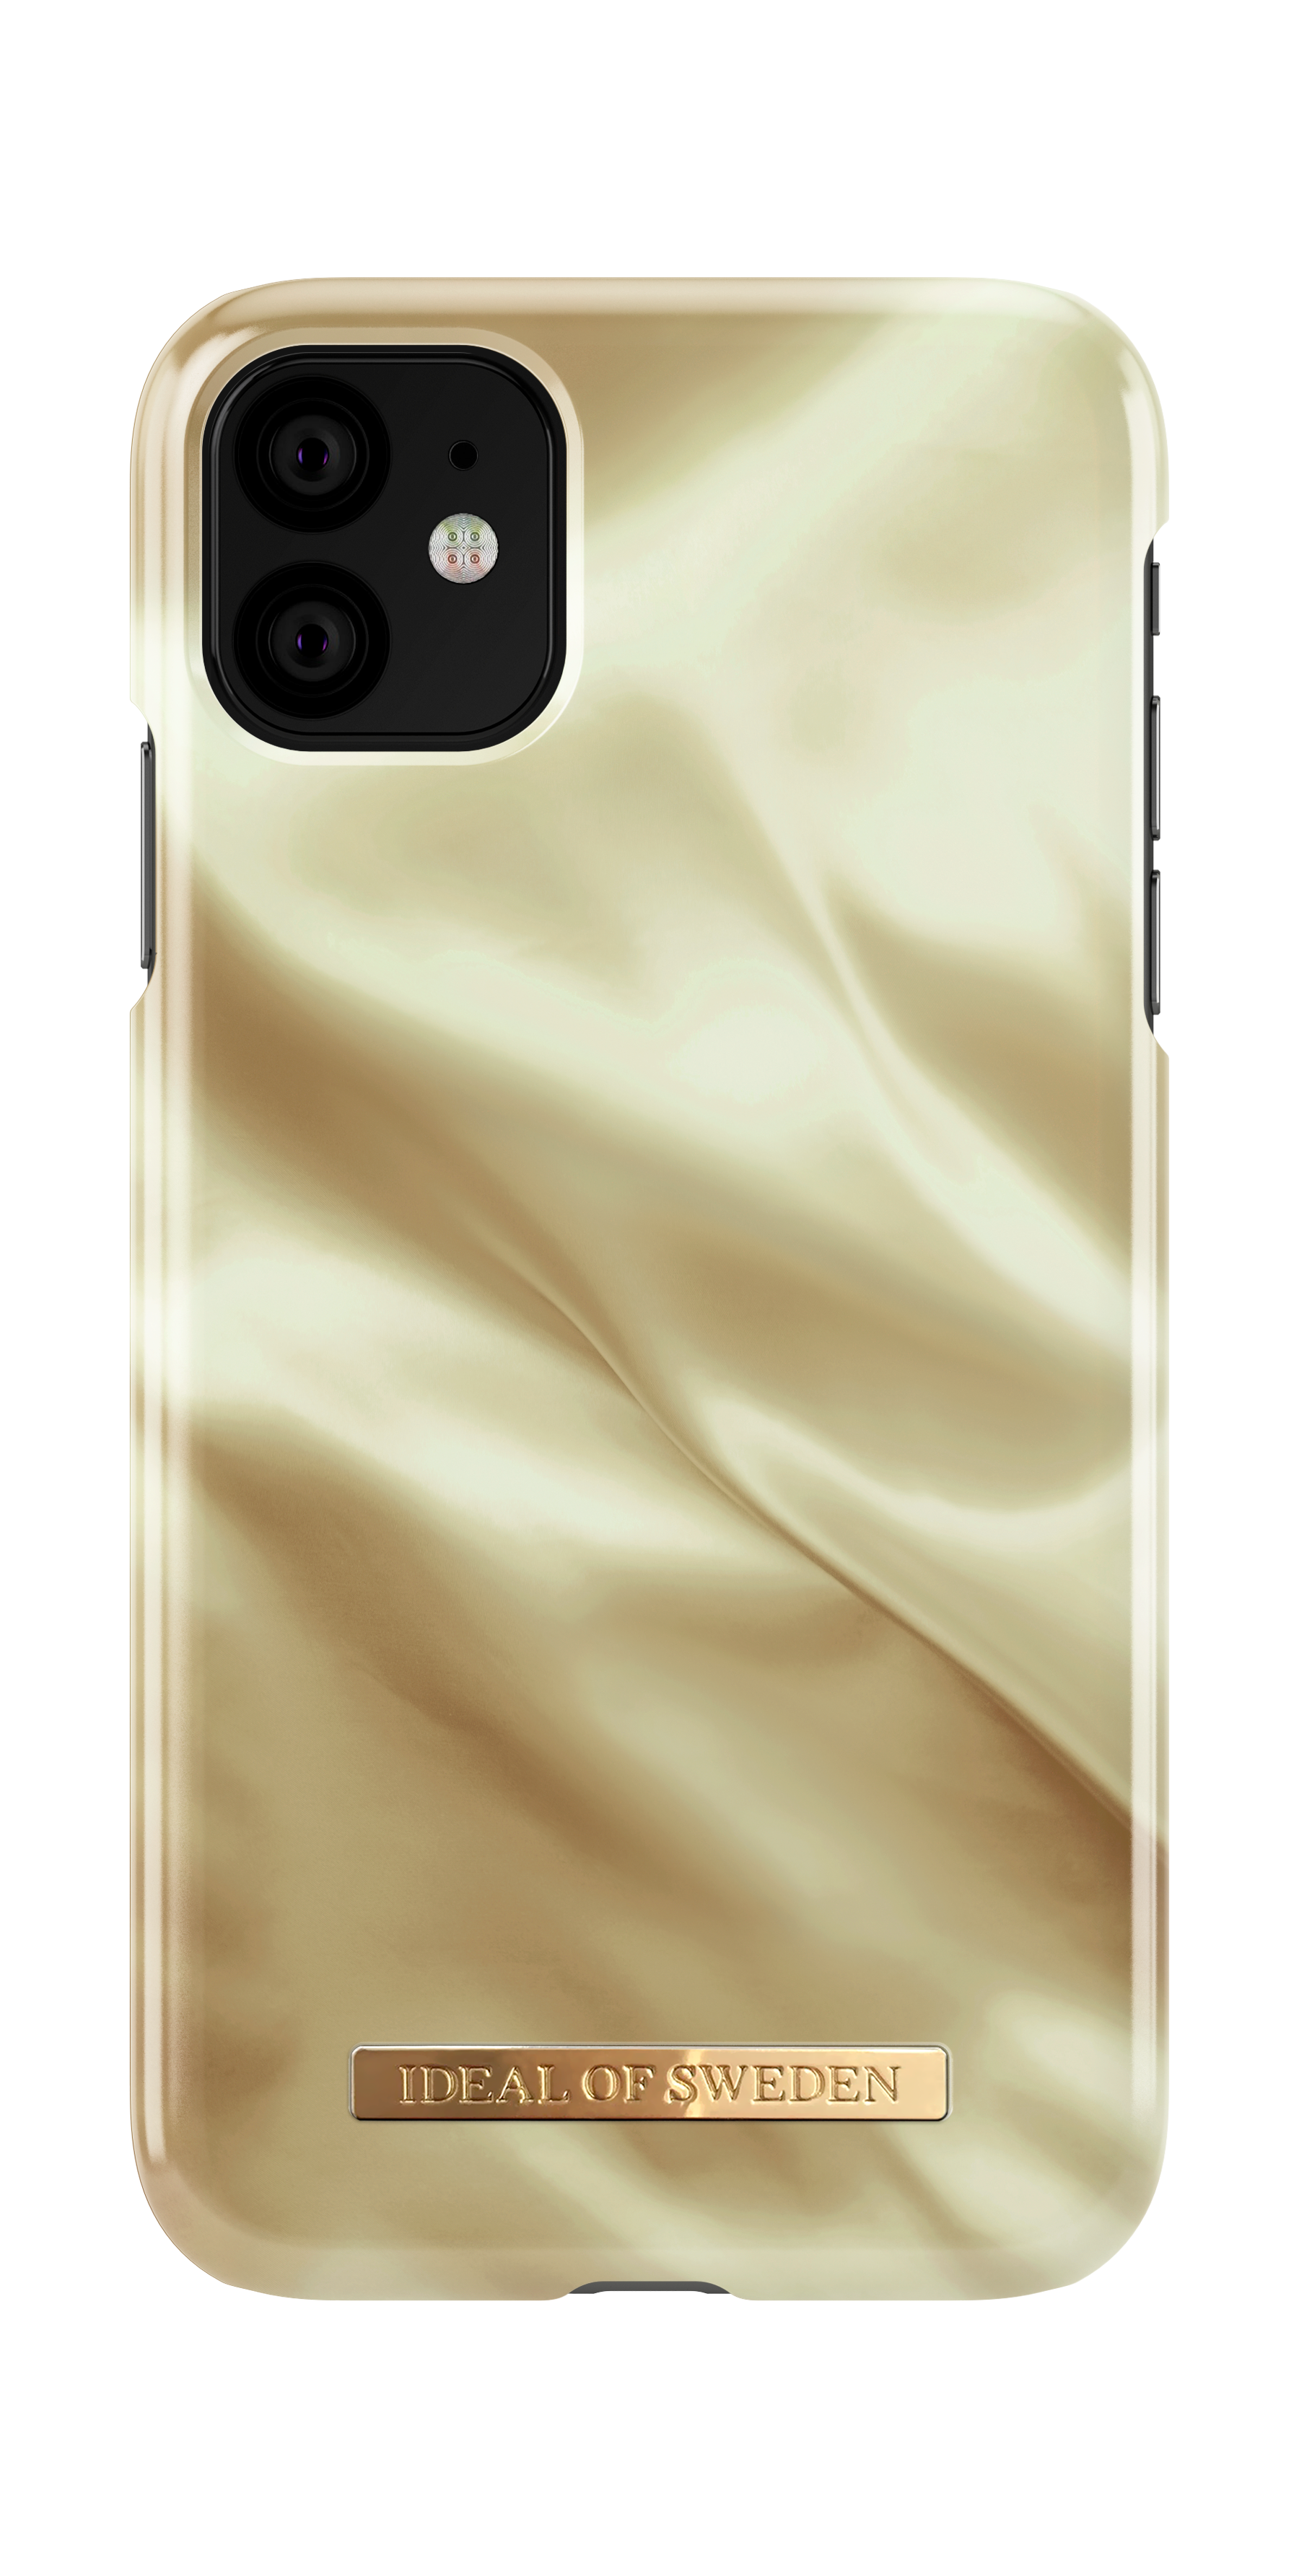 IDEAL OF SWEDEN iPhone Backcover, Honey Apple, Satin XR, iPhone 11, IDFCSC19-I1961-188